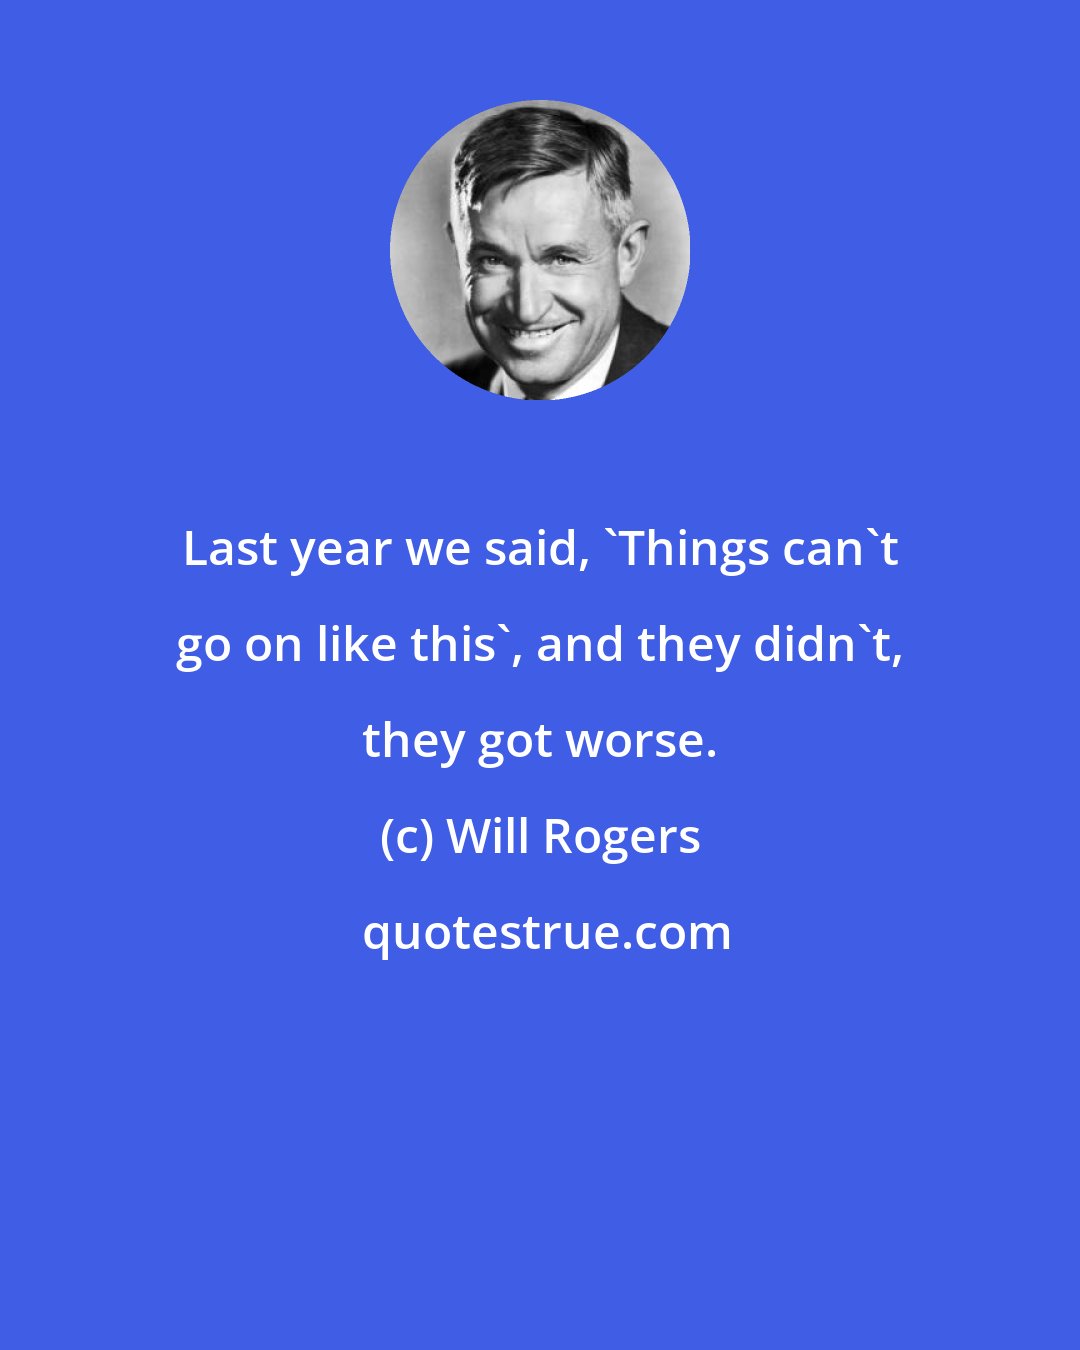 Will Rogers: Last year we said, 'Things can't go on like this', and they didn't, they got worse.